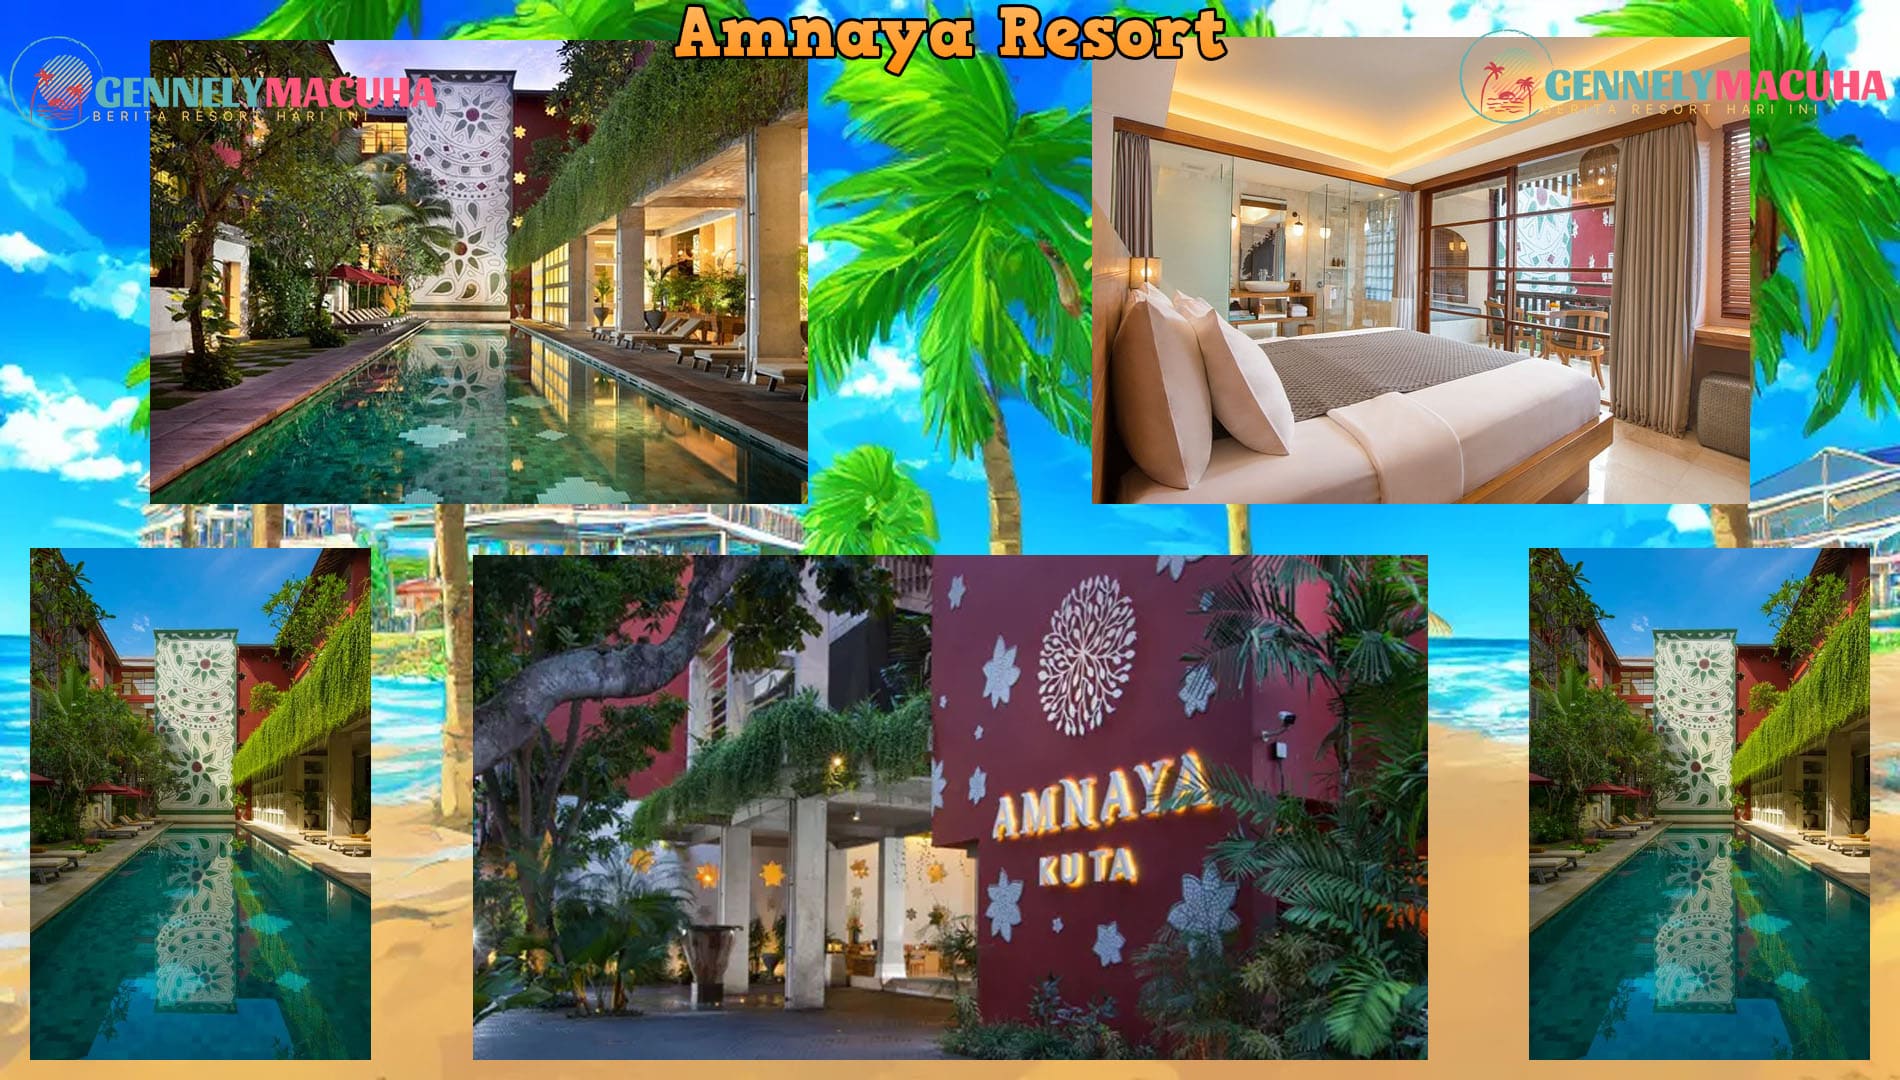 Amnaya Resort Bali: A Tranquil Oasis in the Heart of Paradise